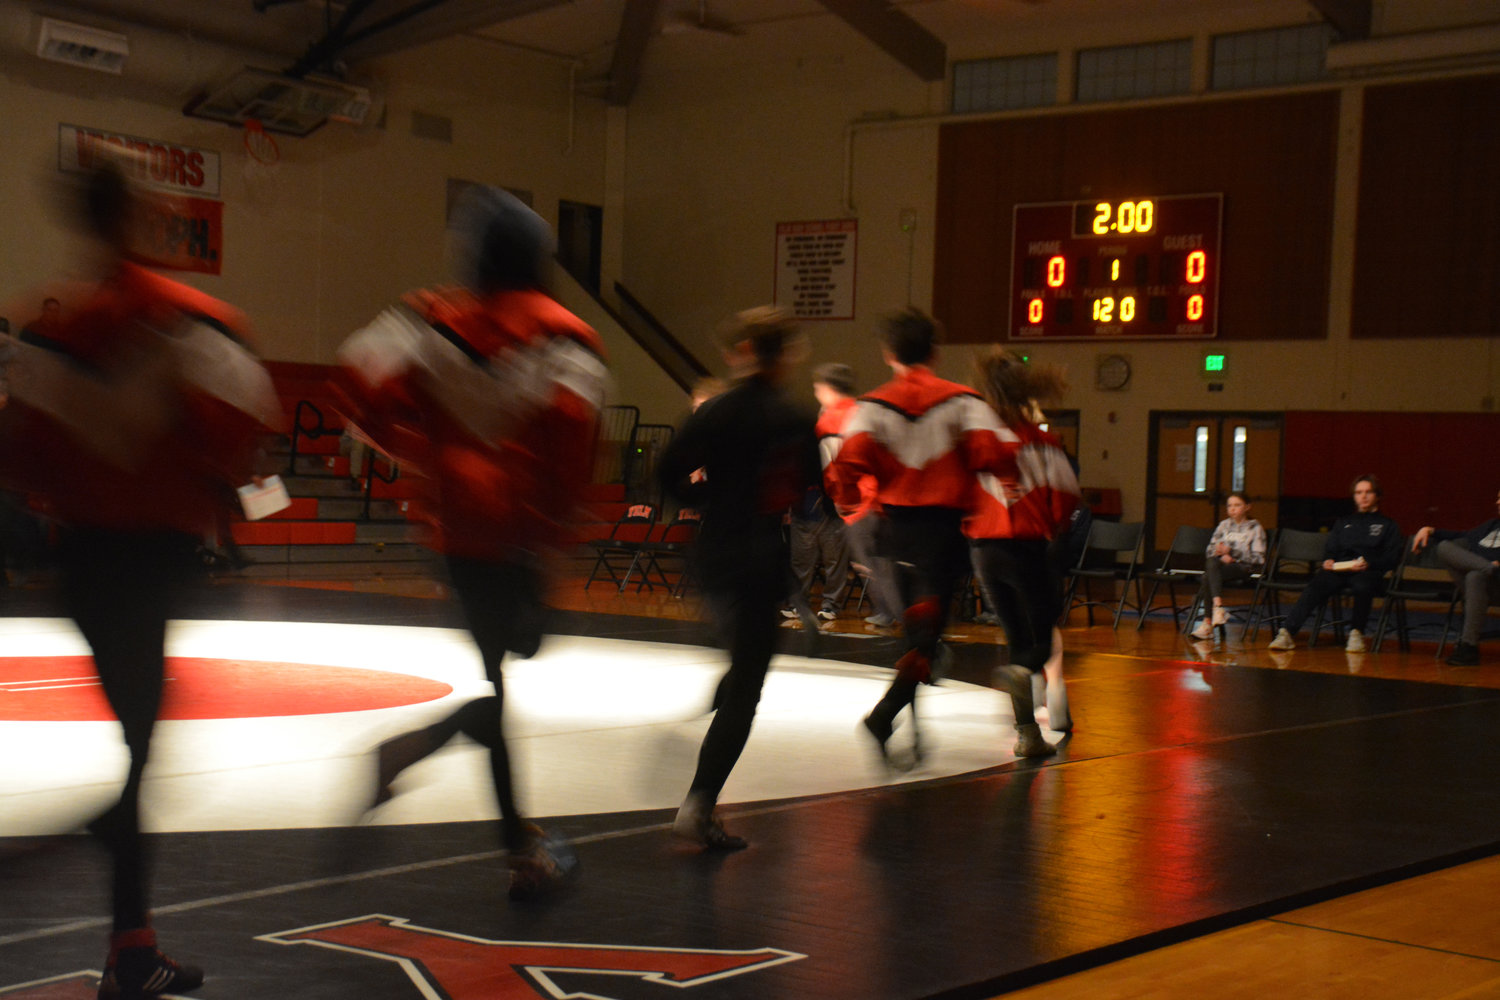 The Yelm boys wrestling team storms the mat as part of their warm up on Jan. 26.